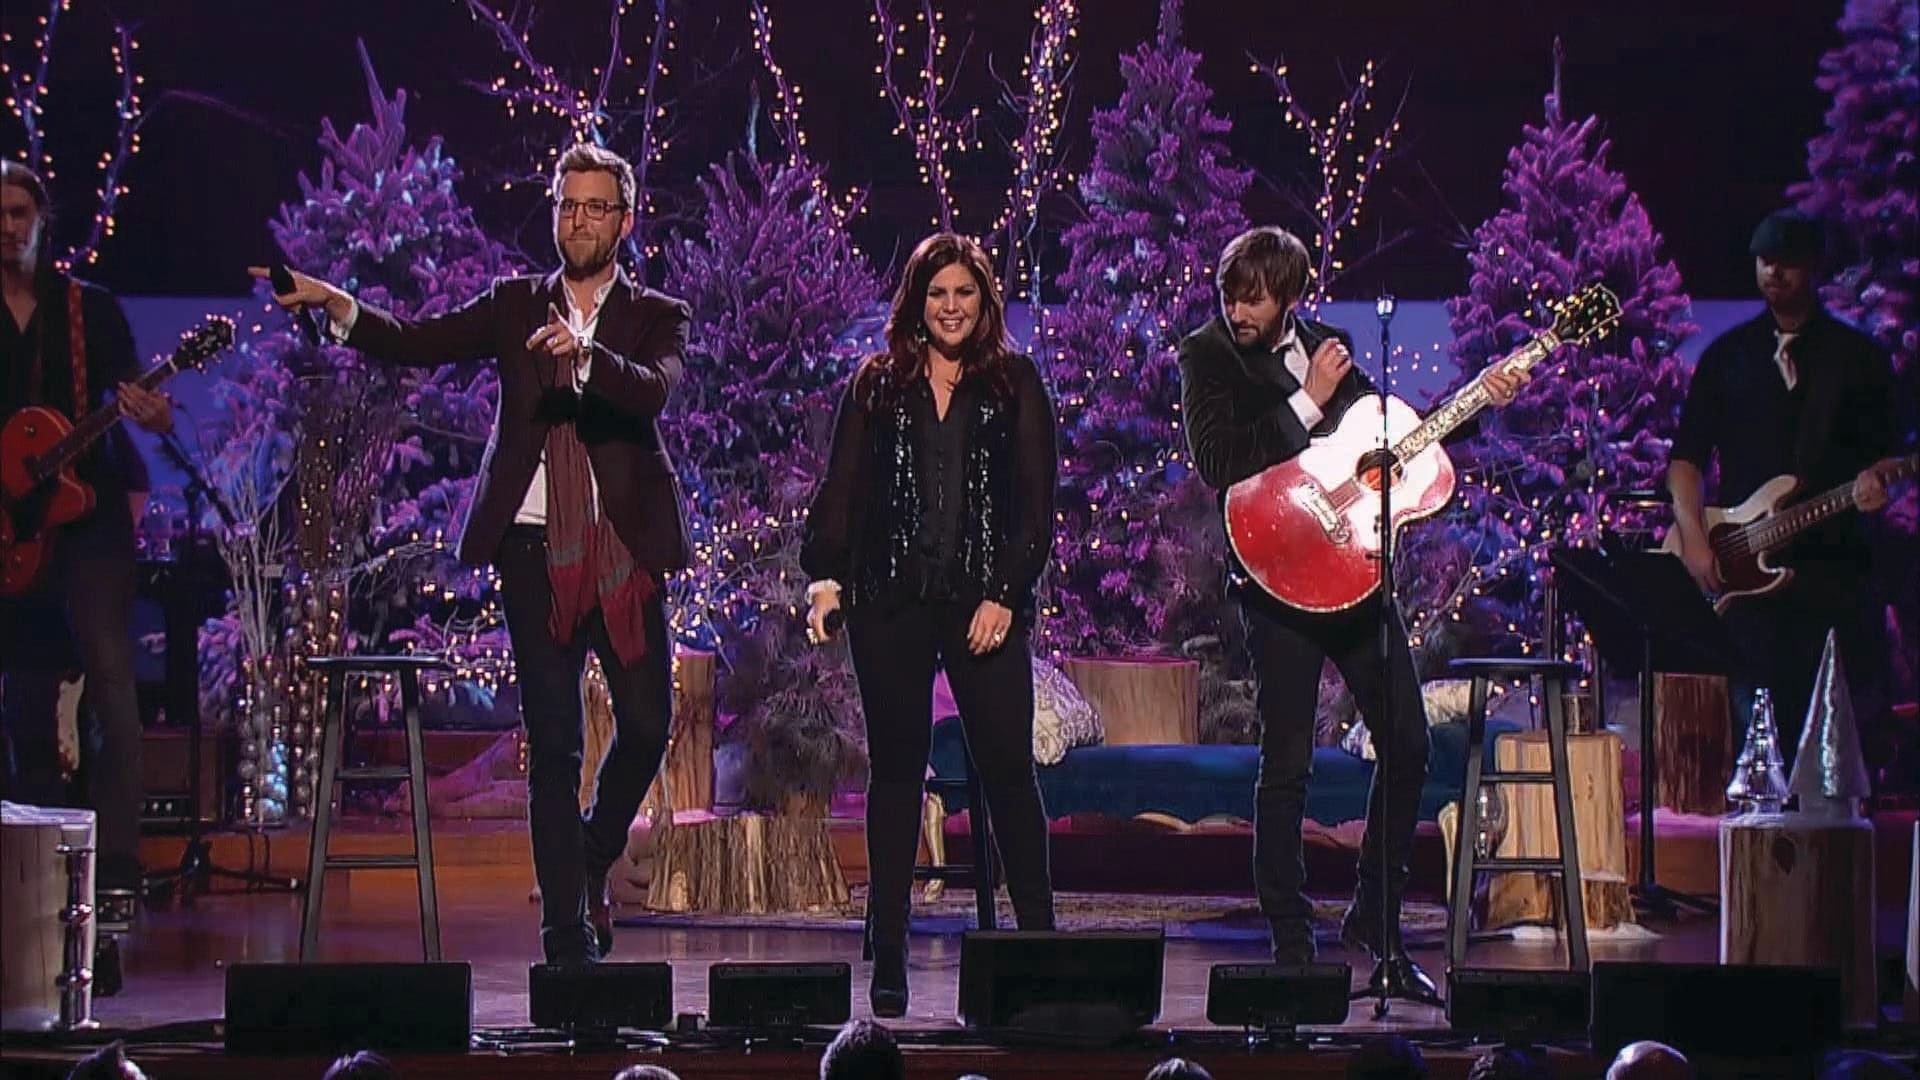 Lady Antebellum Live: On This Winter's Night backdrop